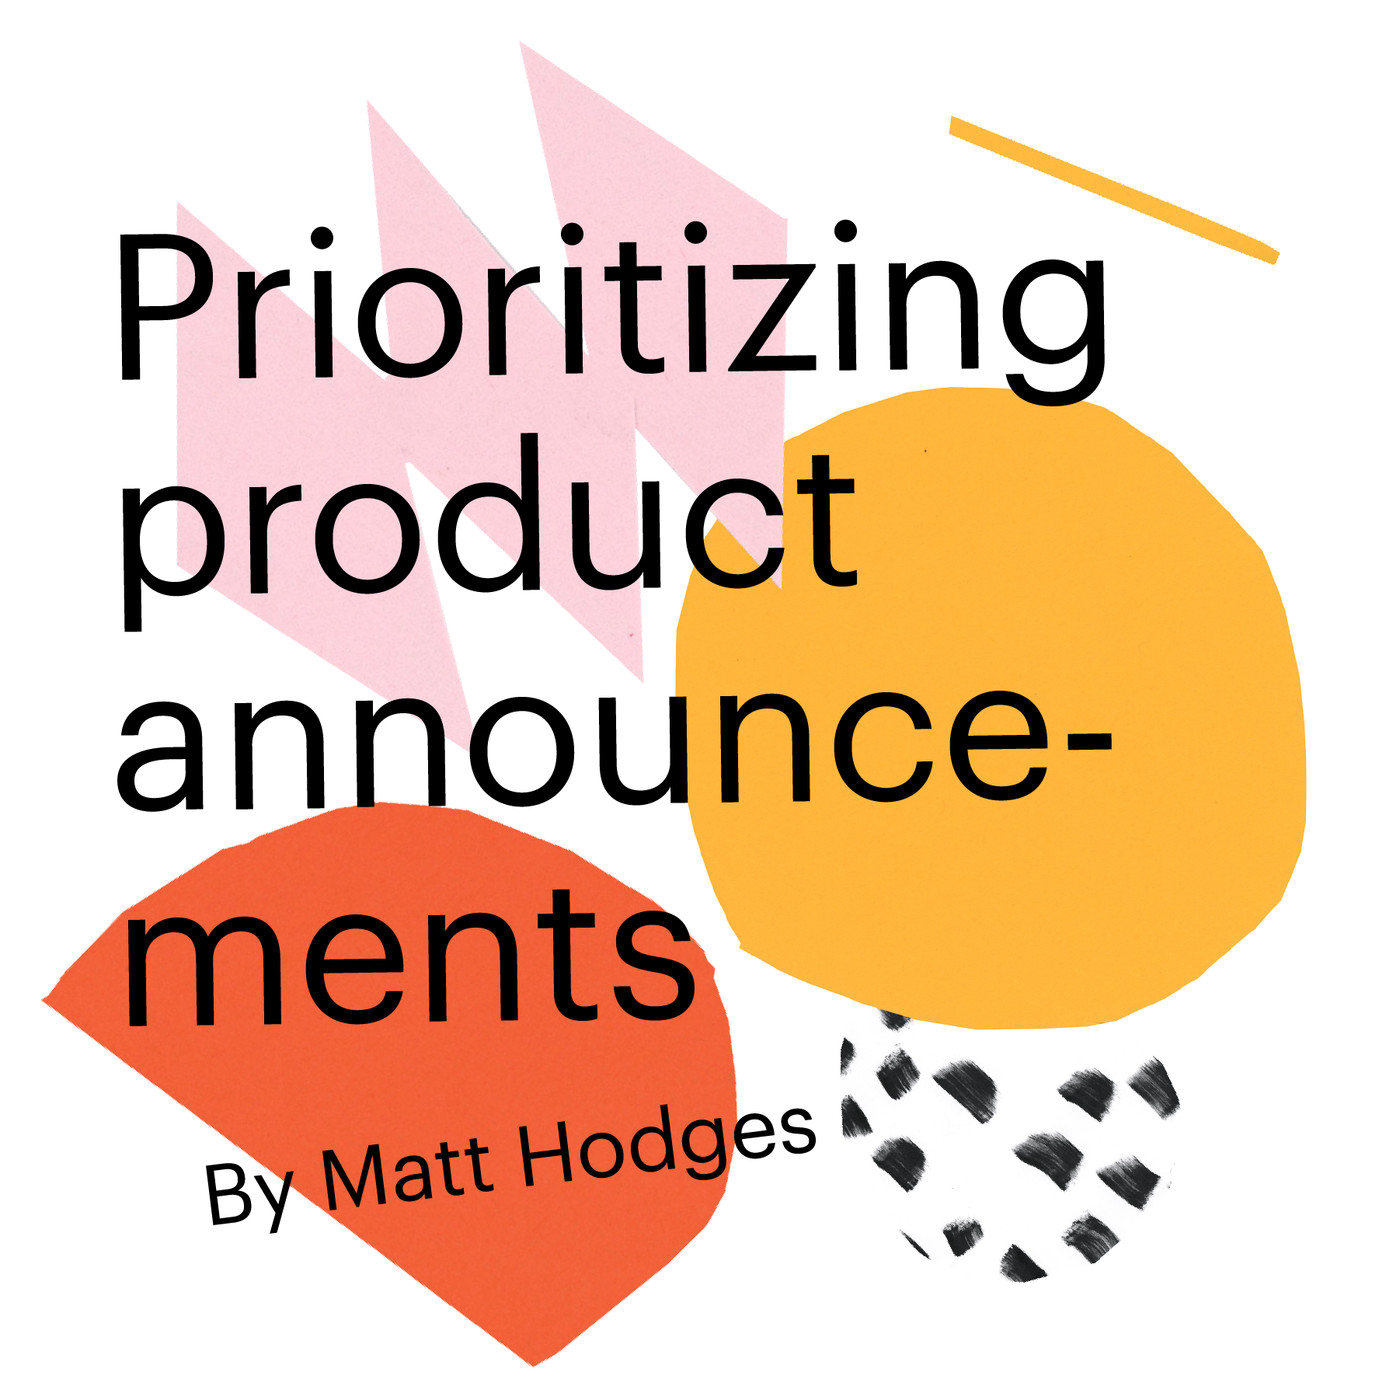 Chapter 8: Prioritizing product announcements